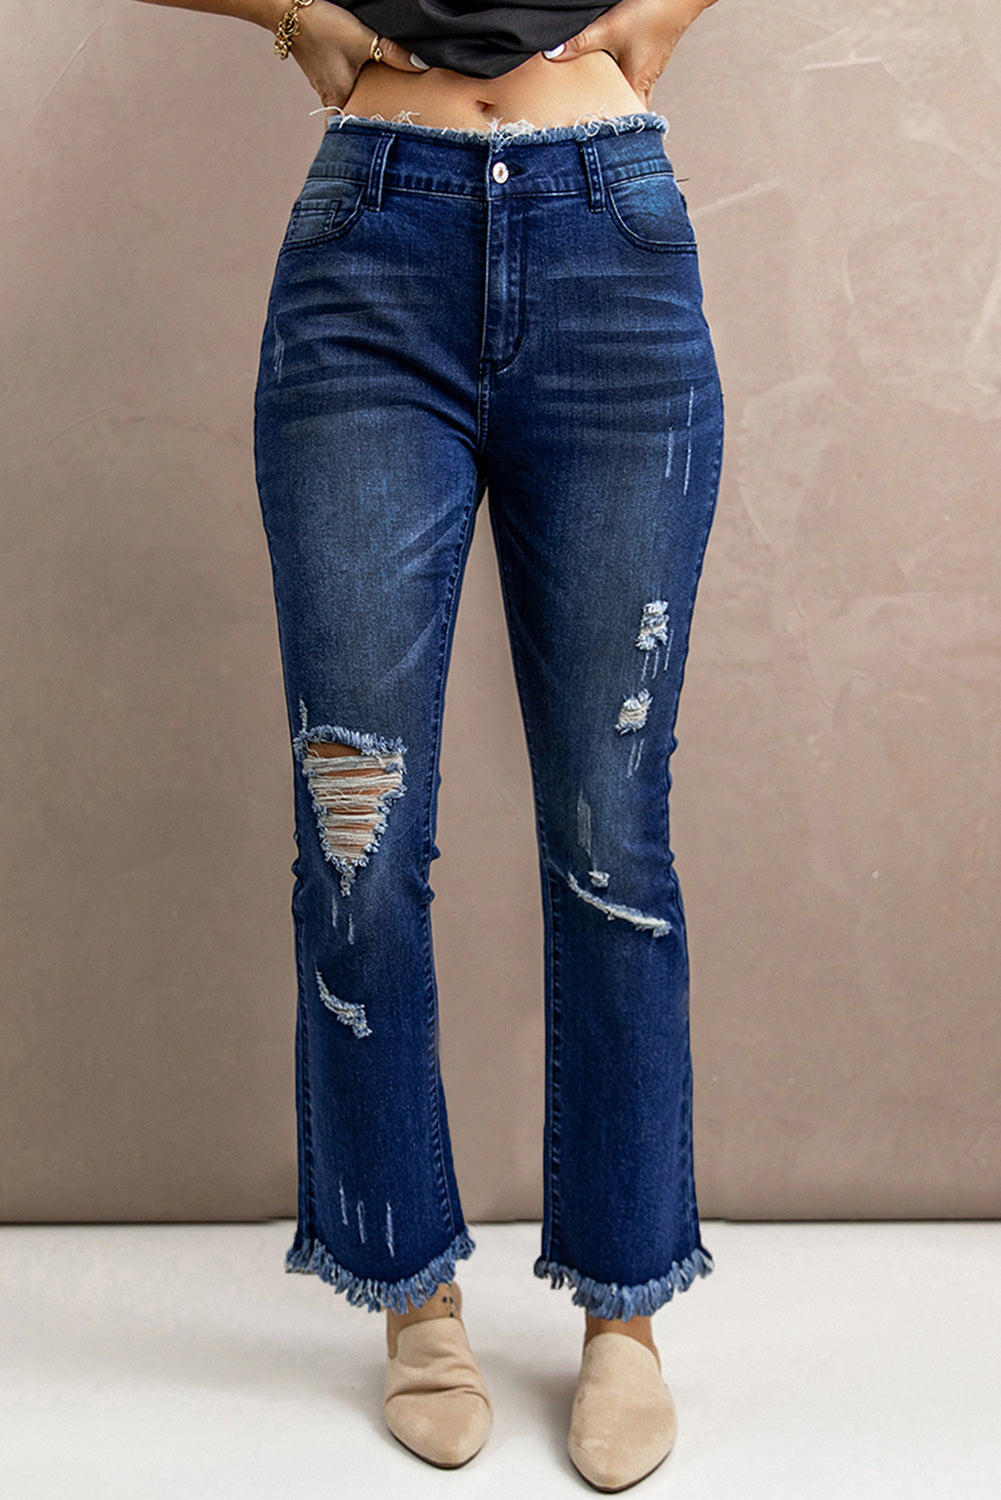 Blue Flare Jeans for Women Frayed Ripped High Waist Wide Leg Pants LC783830-5